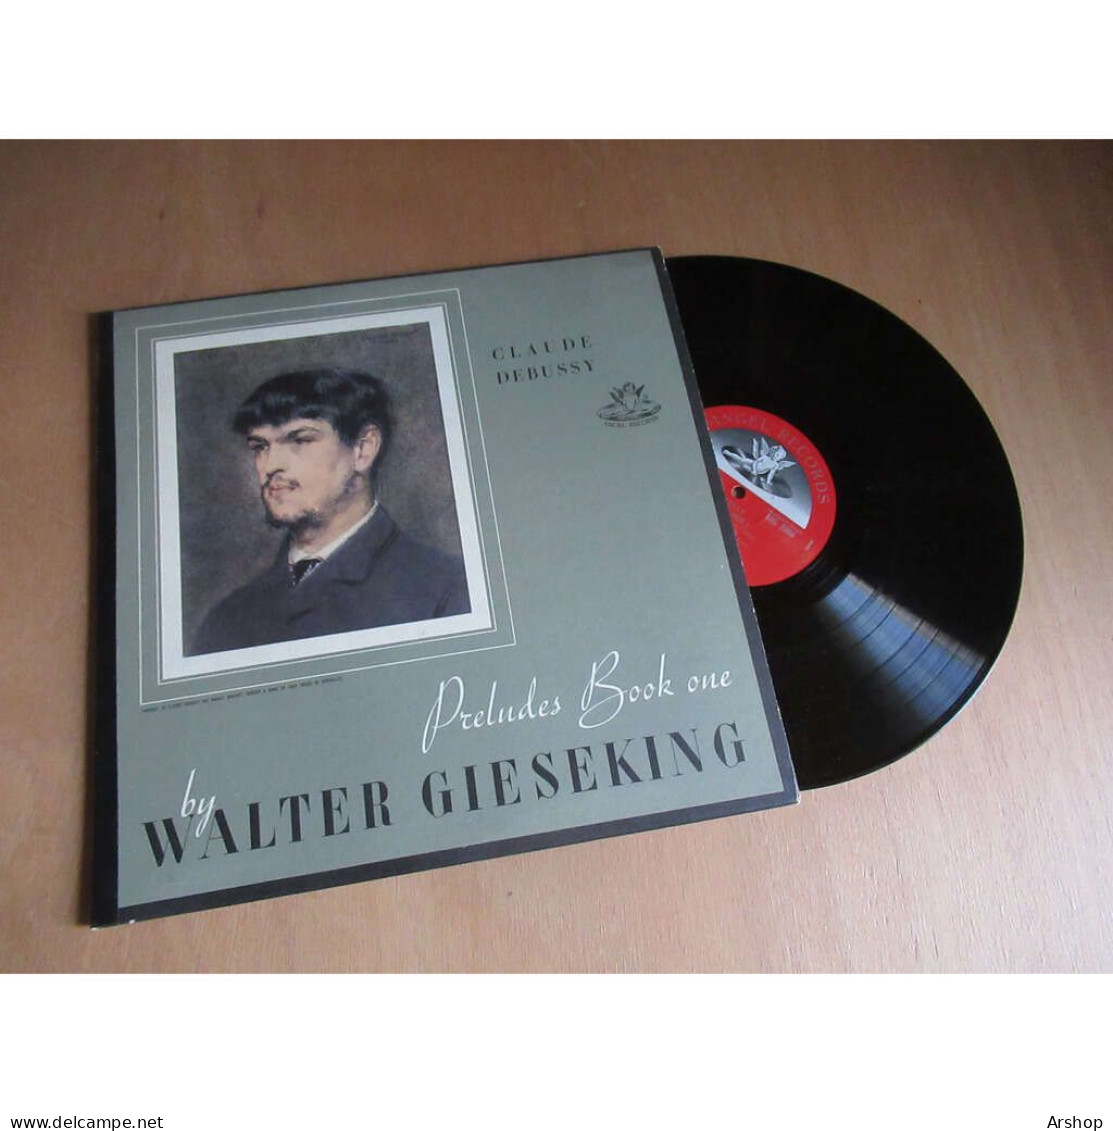 WALTER GIESEKING Preludes Book One DEBUSSY Piano Classique - ANGEL 35066 US Lp - Classica